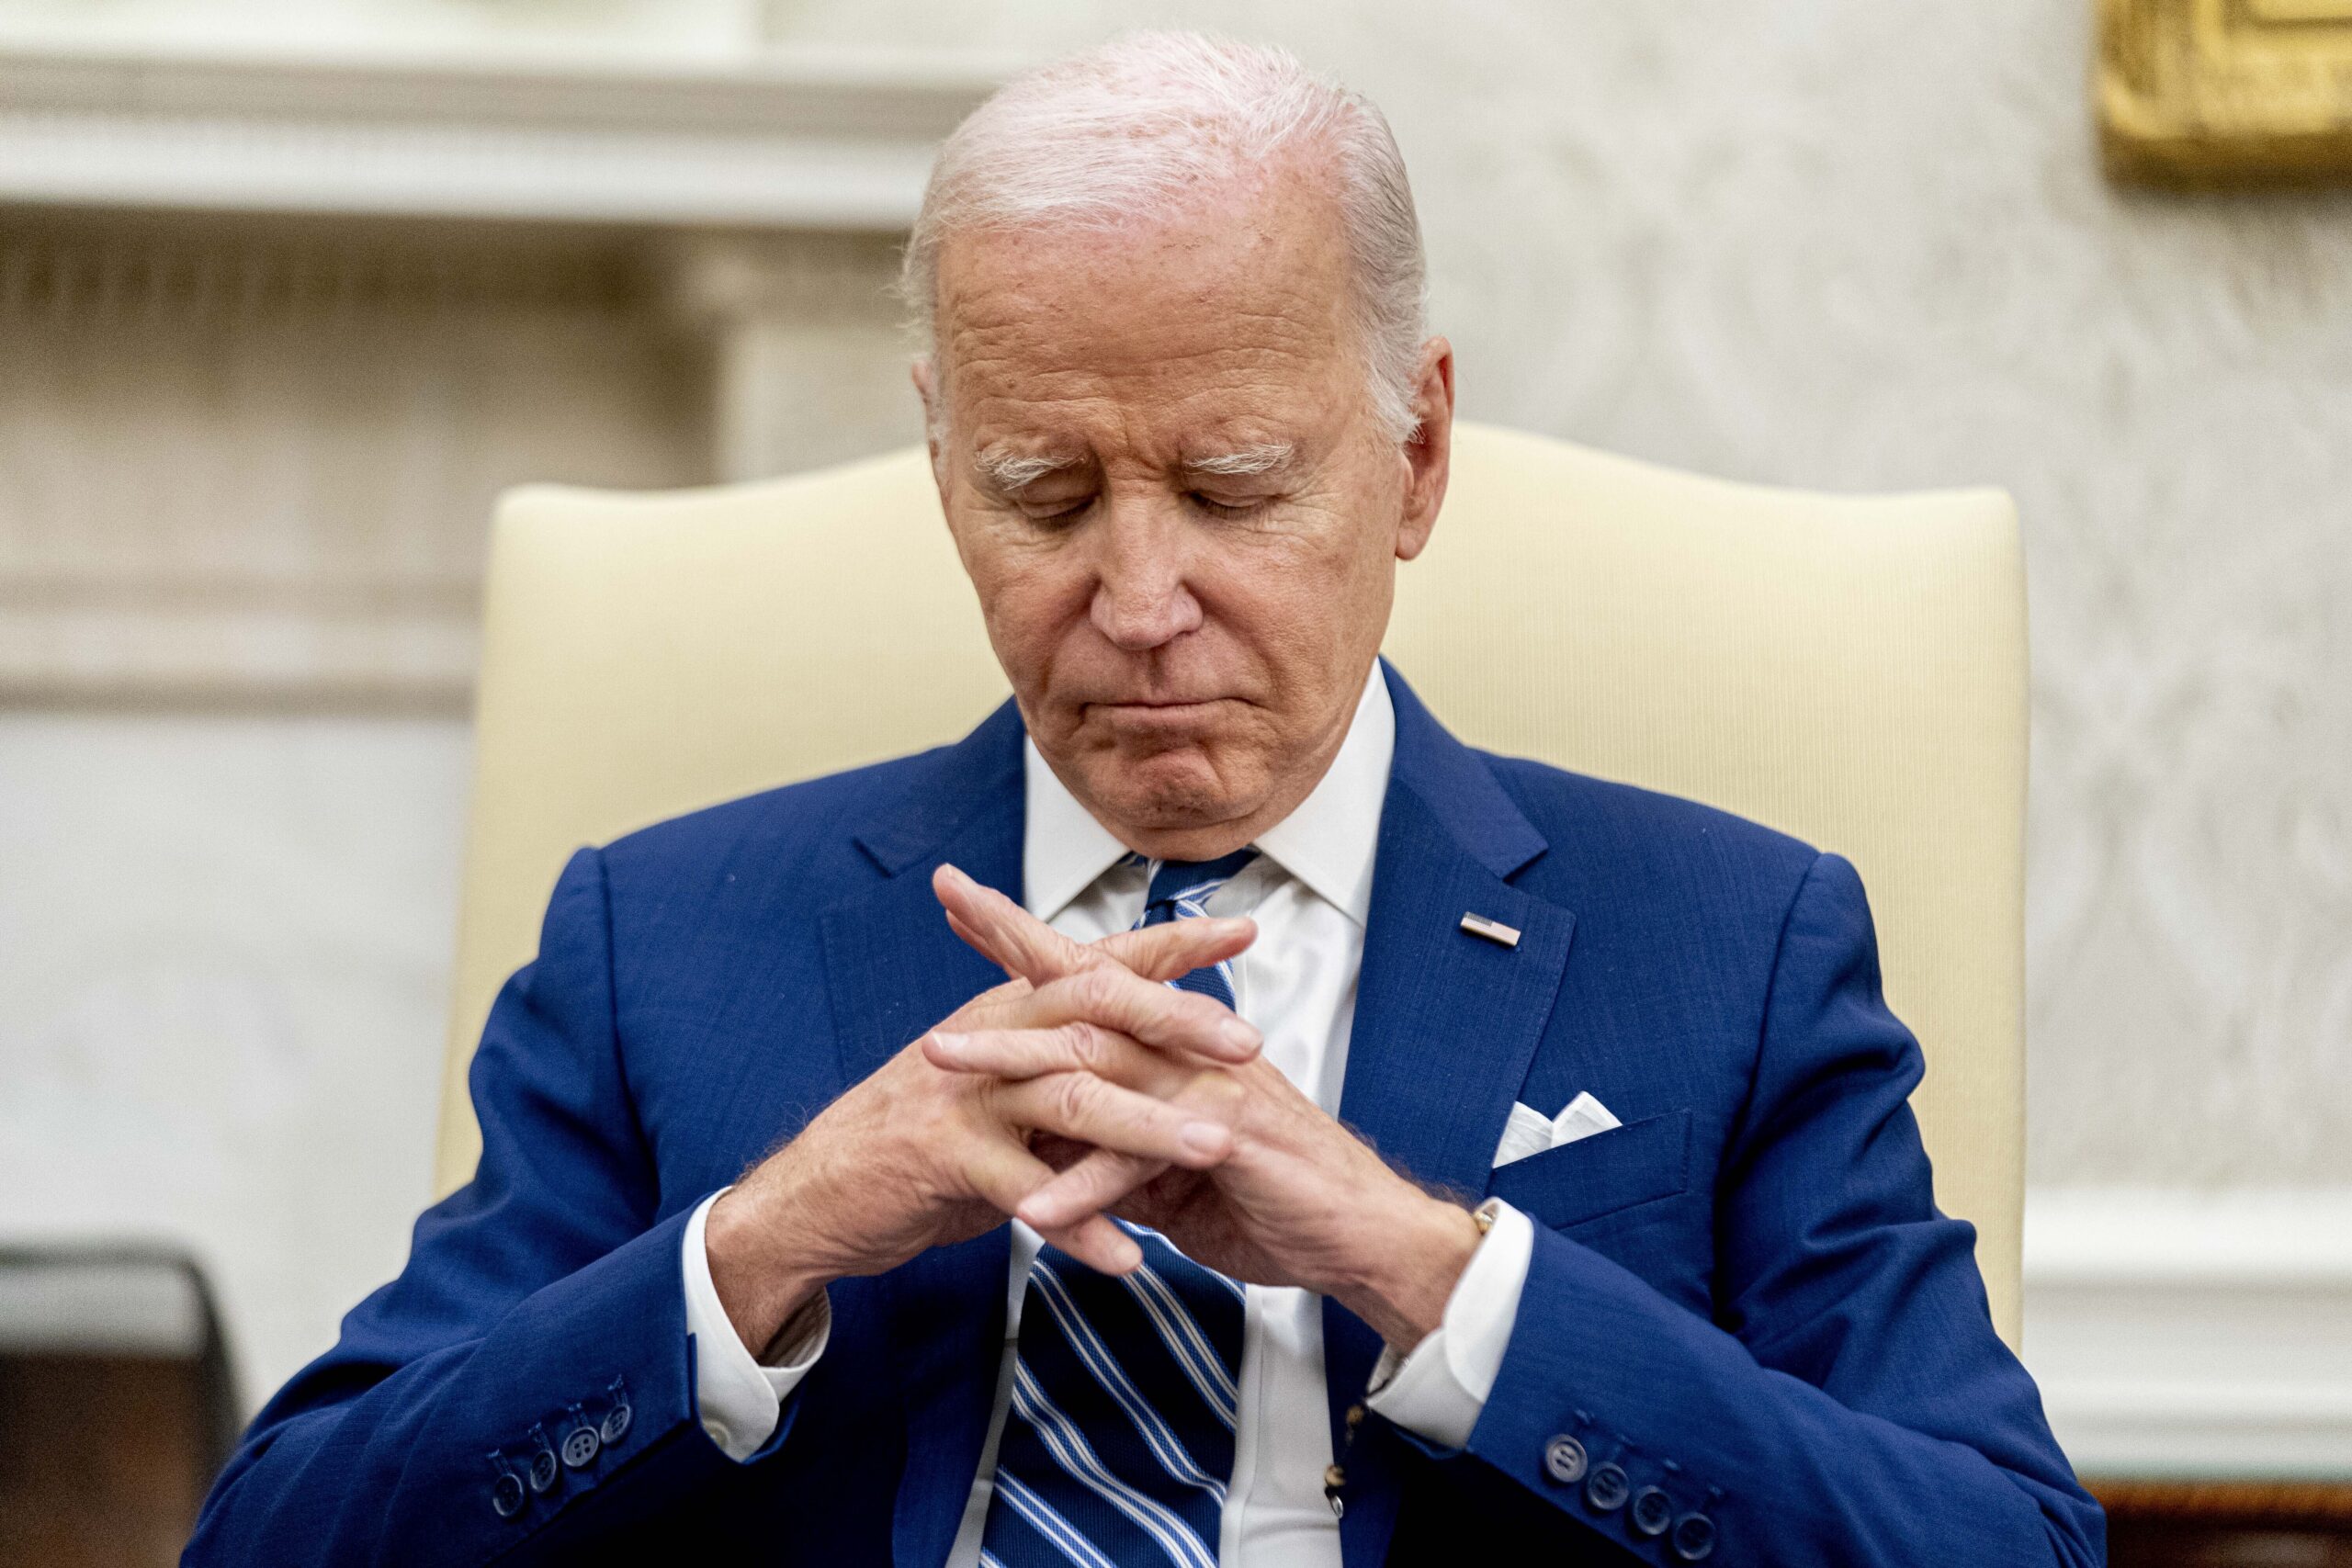 ‘Elderly Man with a Poor Memory’: Devastating DOJ Report Says Biden ‘Did Not Remember When He Was Vice President’ and ‘When His Son Died’